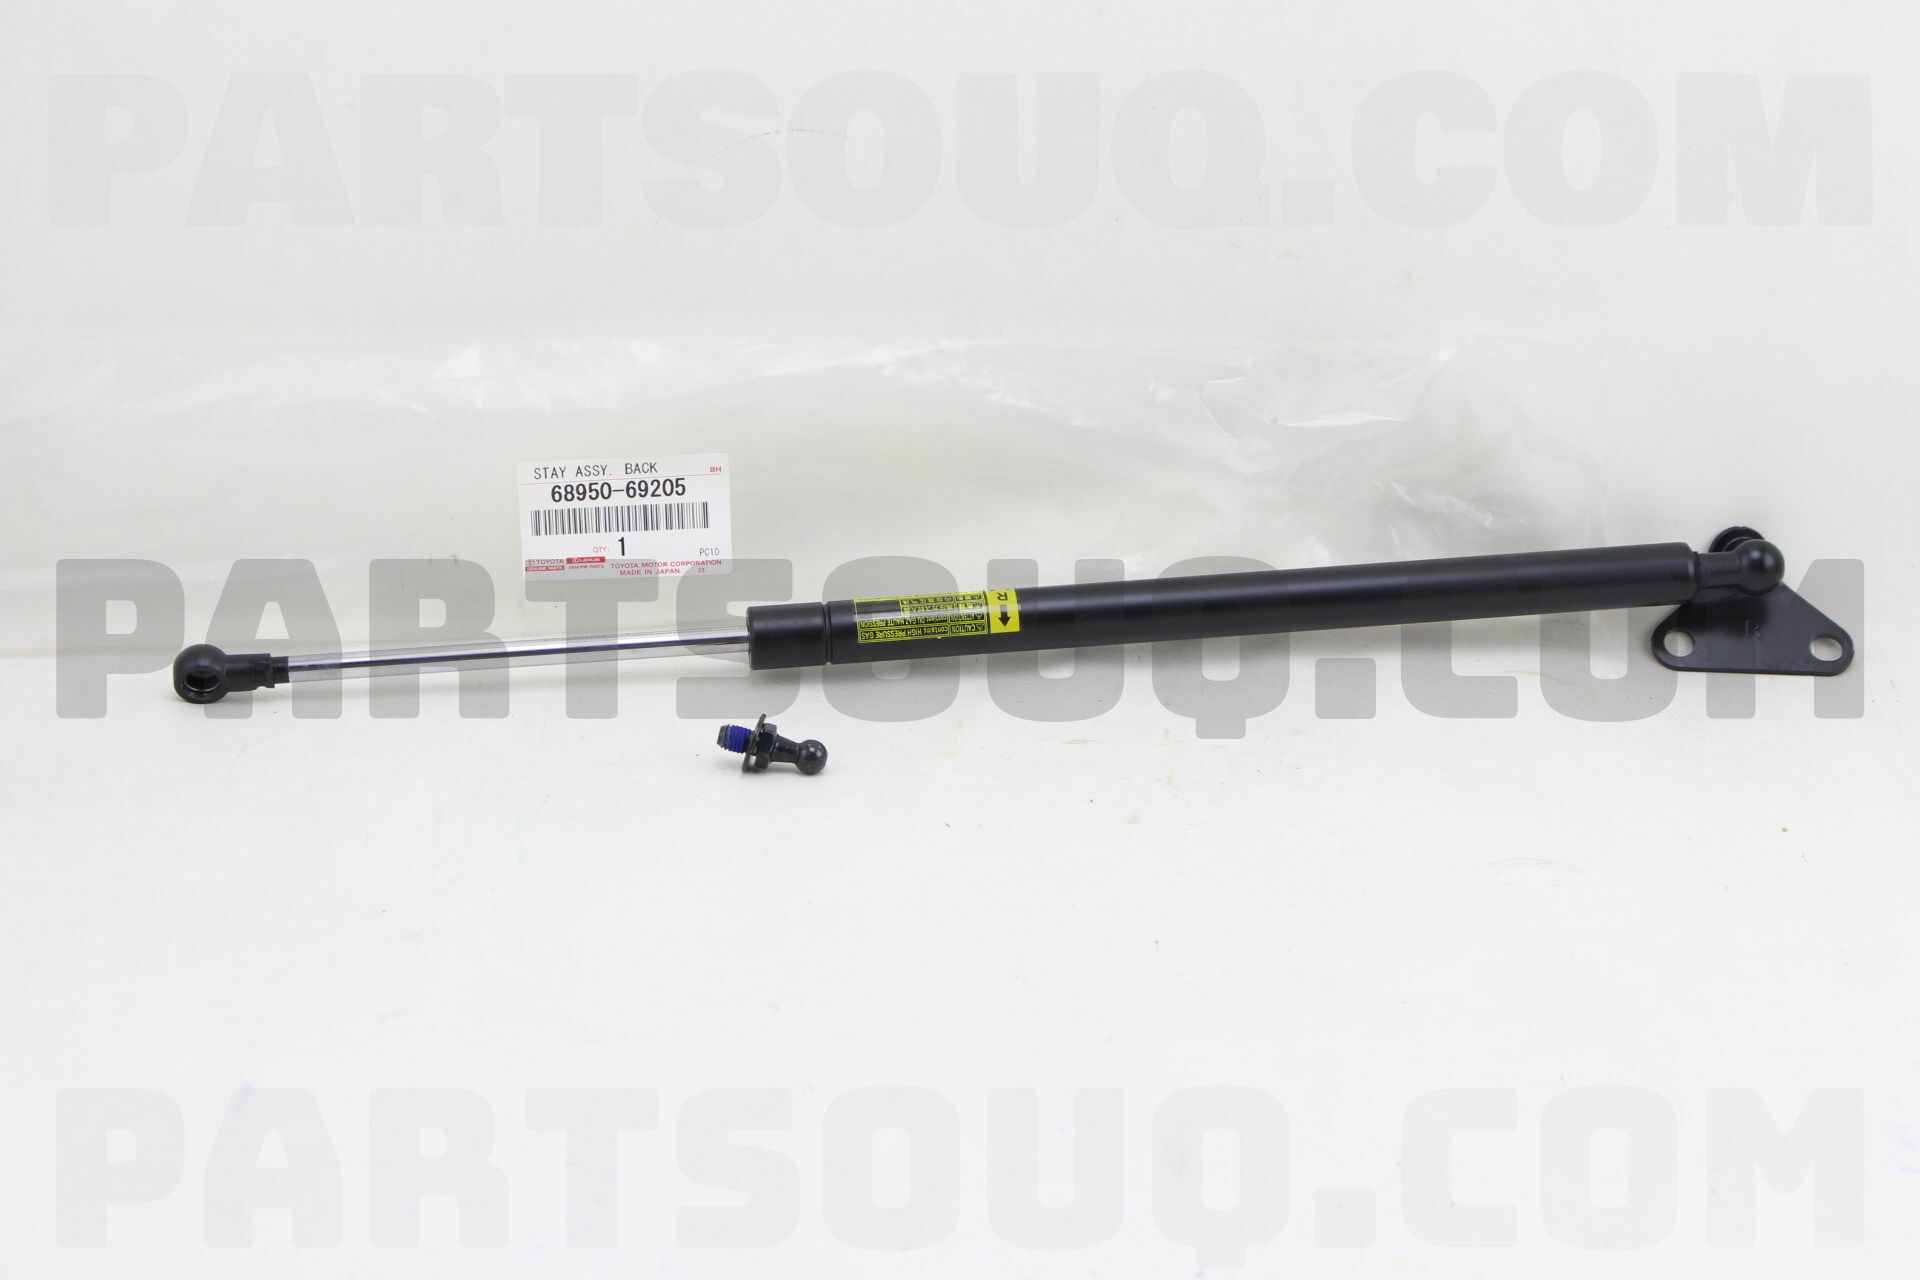 rh 6895069057 back door New Genuine OEM Part Details about   68950-69057 Toyota Stay assy